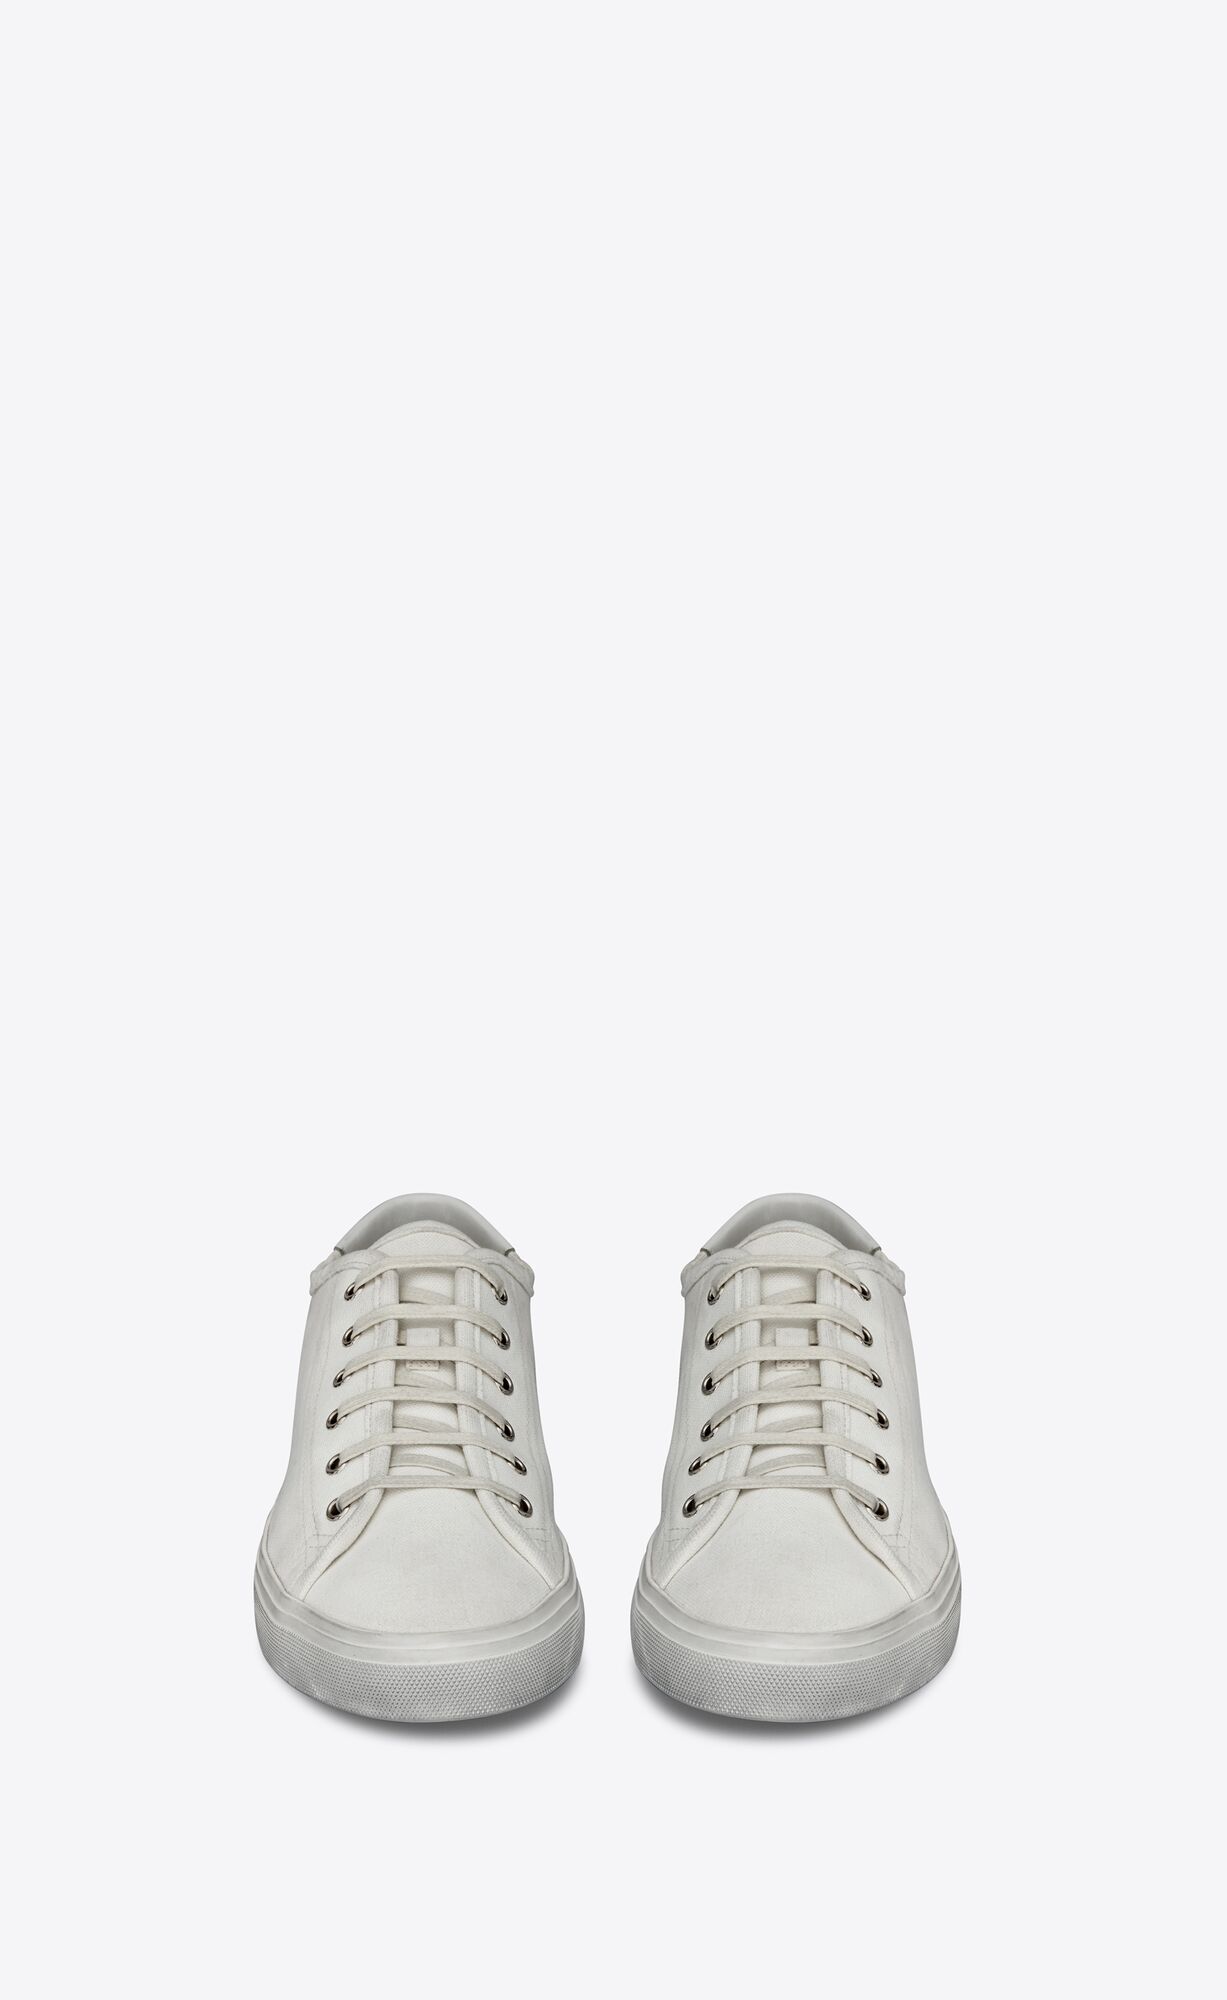 Andy sneakers in leather | Saint Laurent | YSL.com